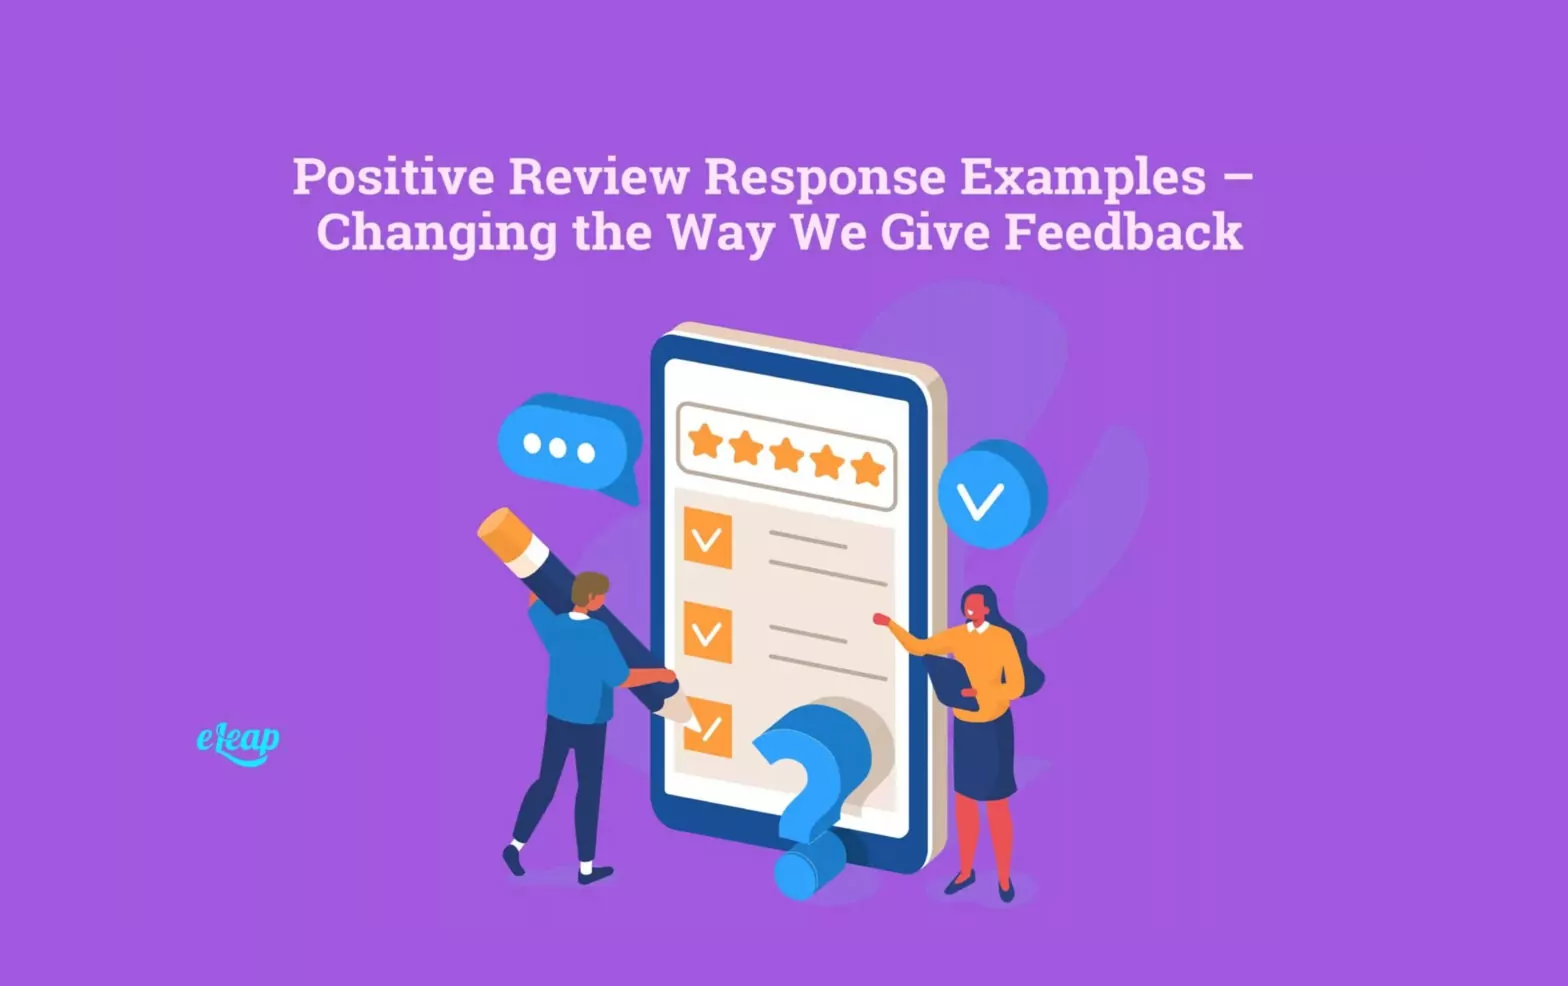 Positive Review Response Examples – Changing the Way We Give Feedback